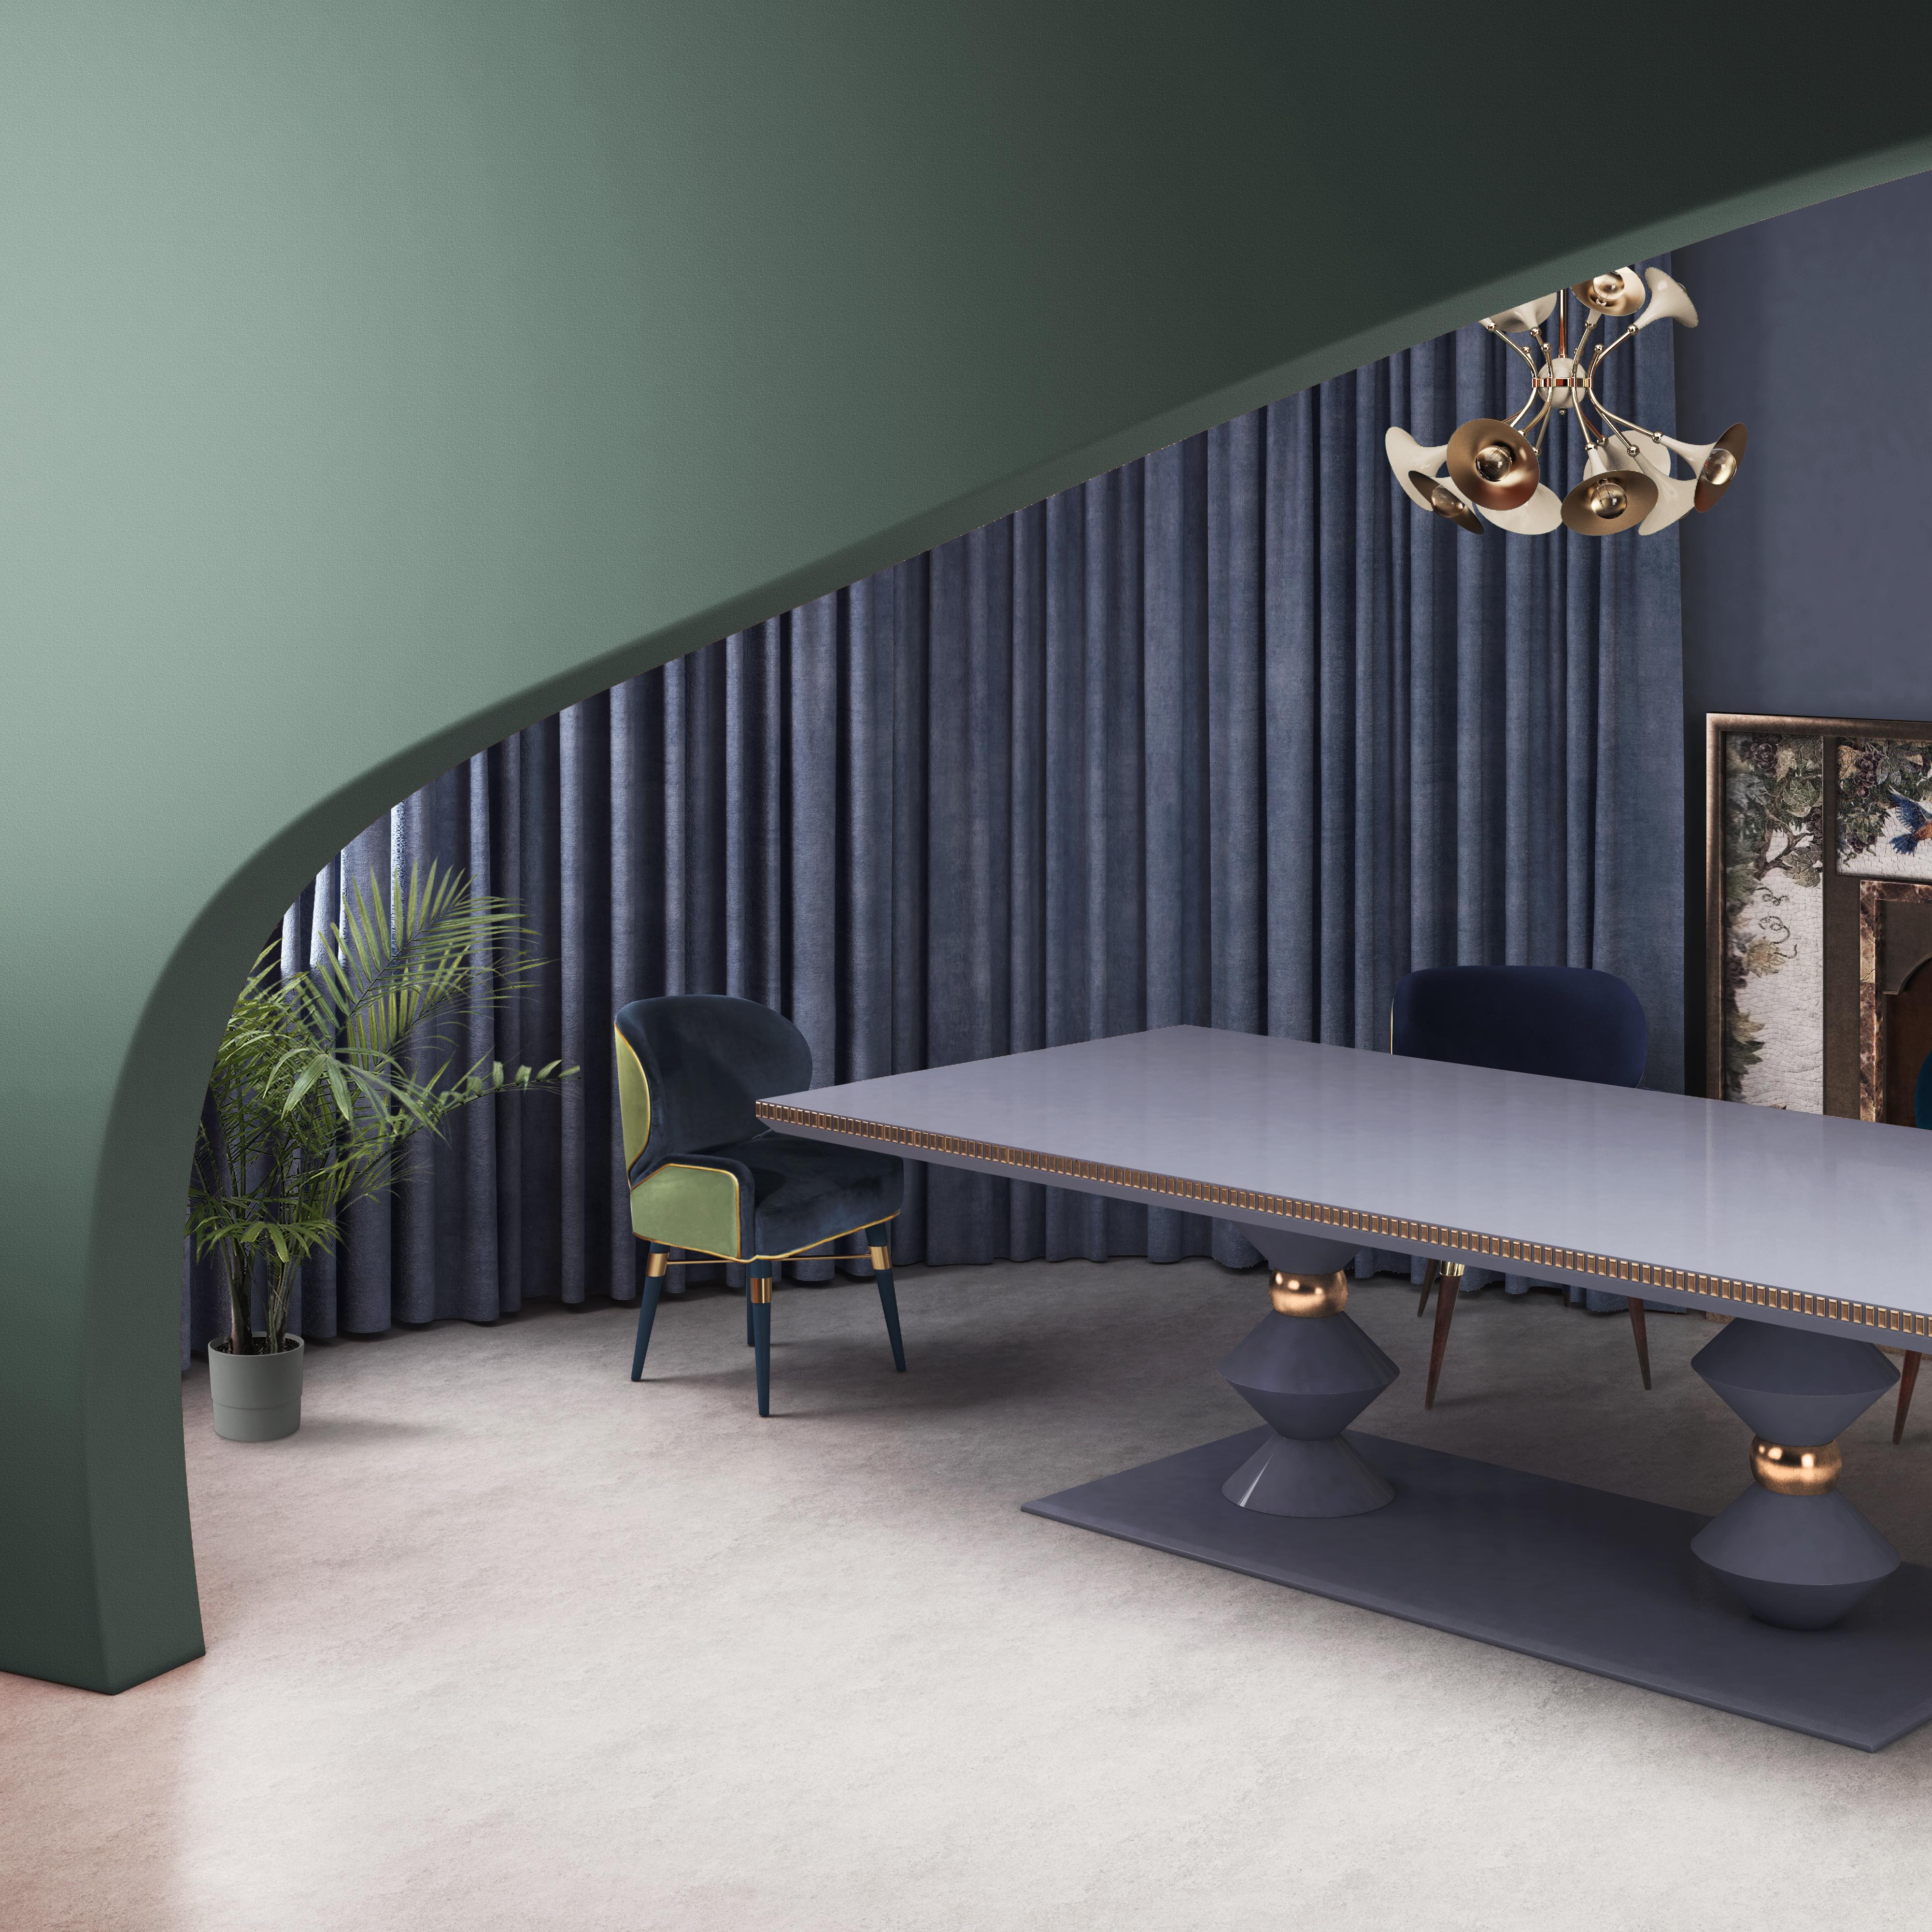 Elegant and simply described as the bastion of Portuguese luxury, the Cortez modern dining table exhales the splendor of the uniqueness of the kings and queens’ era. It's timeless originality and imperial design were inspired by the Palace of Ajuda,